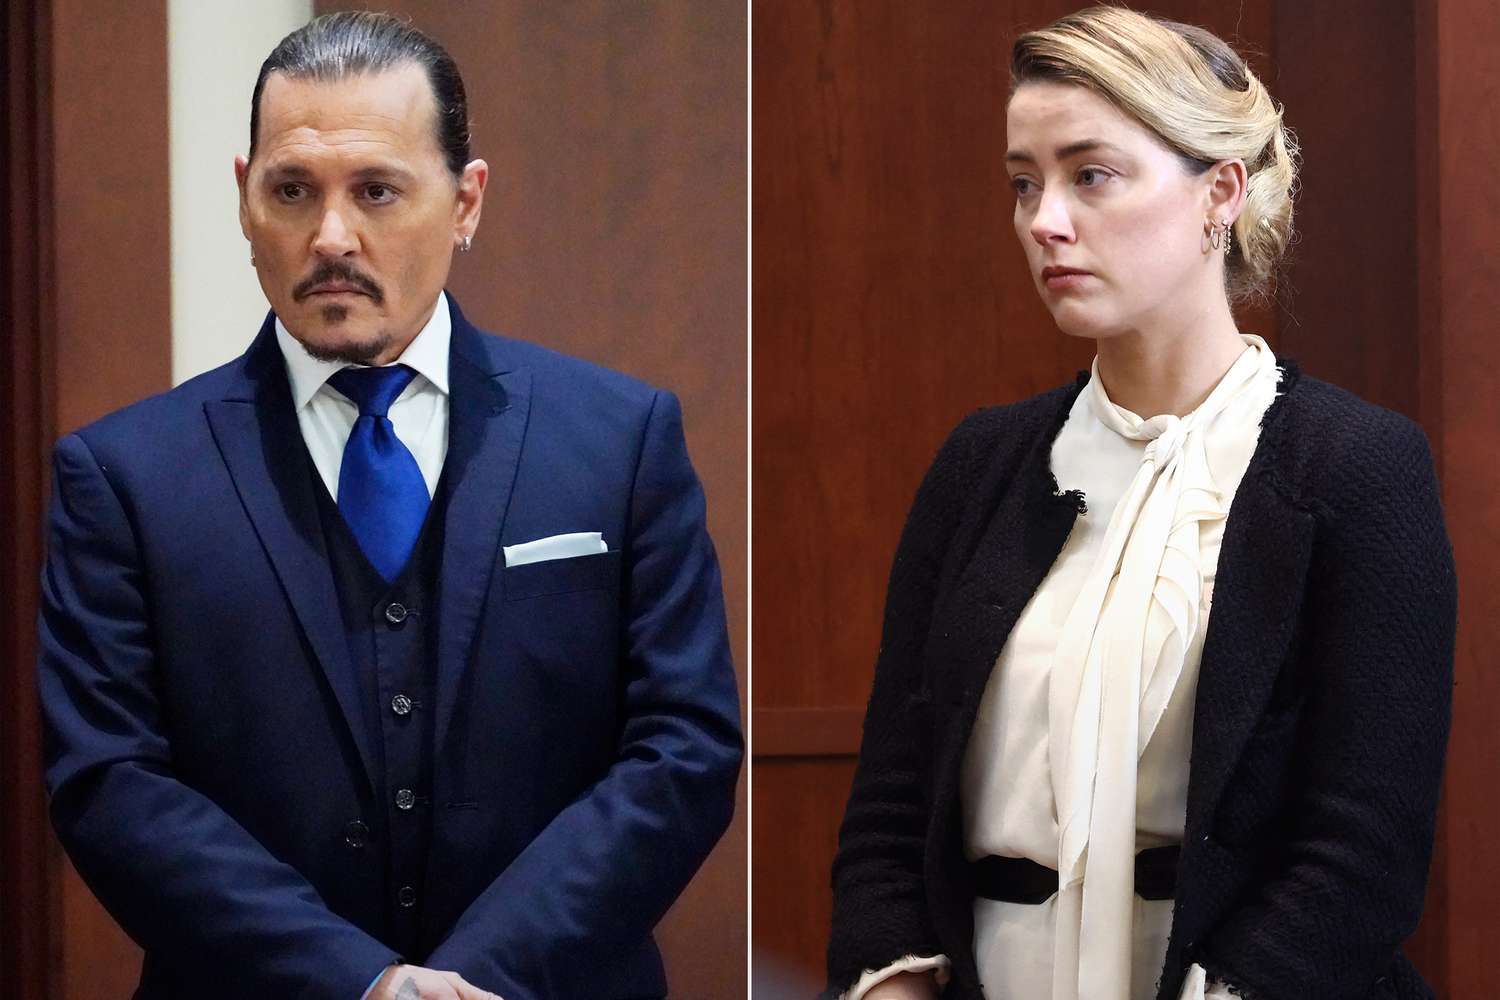 Johnny Depp testifies in the courtroom at the Fairfax County Circuit Courthouse in Fairfax, Virginia, April 25, 2022. - Actor Johnny Depp sued his ex-wife Amber Heard for libel in Fairfax County Circuit Court after she wrote an op-ed piece in The Washington Post in 2018 referring to herself as a "public figure representing domestic abuse." (Photo by Steve Helber / POOL / AFP) (Photo by STEVE HELBER/POOL/AFP via Getty Images); Amber Heard (L) testifies as US actor Johnny Depp looks on during a defamation trial at the Fairfax County Circuit Courthouse in Fairfax, Virginia, on May 5, 2022. - Actor Johnny Depp is suing ex-wife Amber Heard for libel after she wrote an op-ed piece in The Washington Post in 2018 referring to herself as a public figure representing domestic abuse. (Photo by Jim LO SCALZO / POOL / AFP) (Photo by JIM LO SCALZO/POOL/AFP via Getty Images)